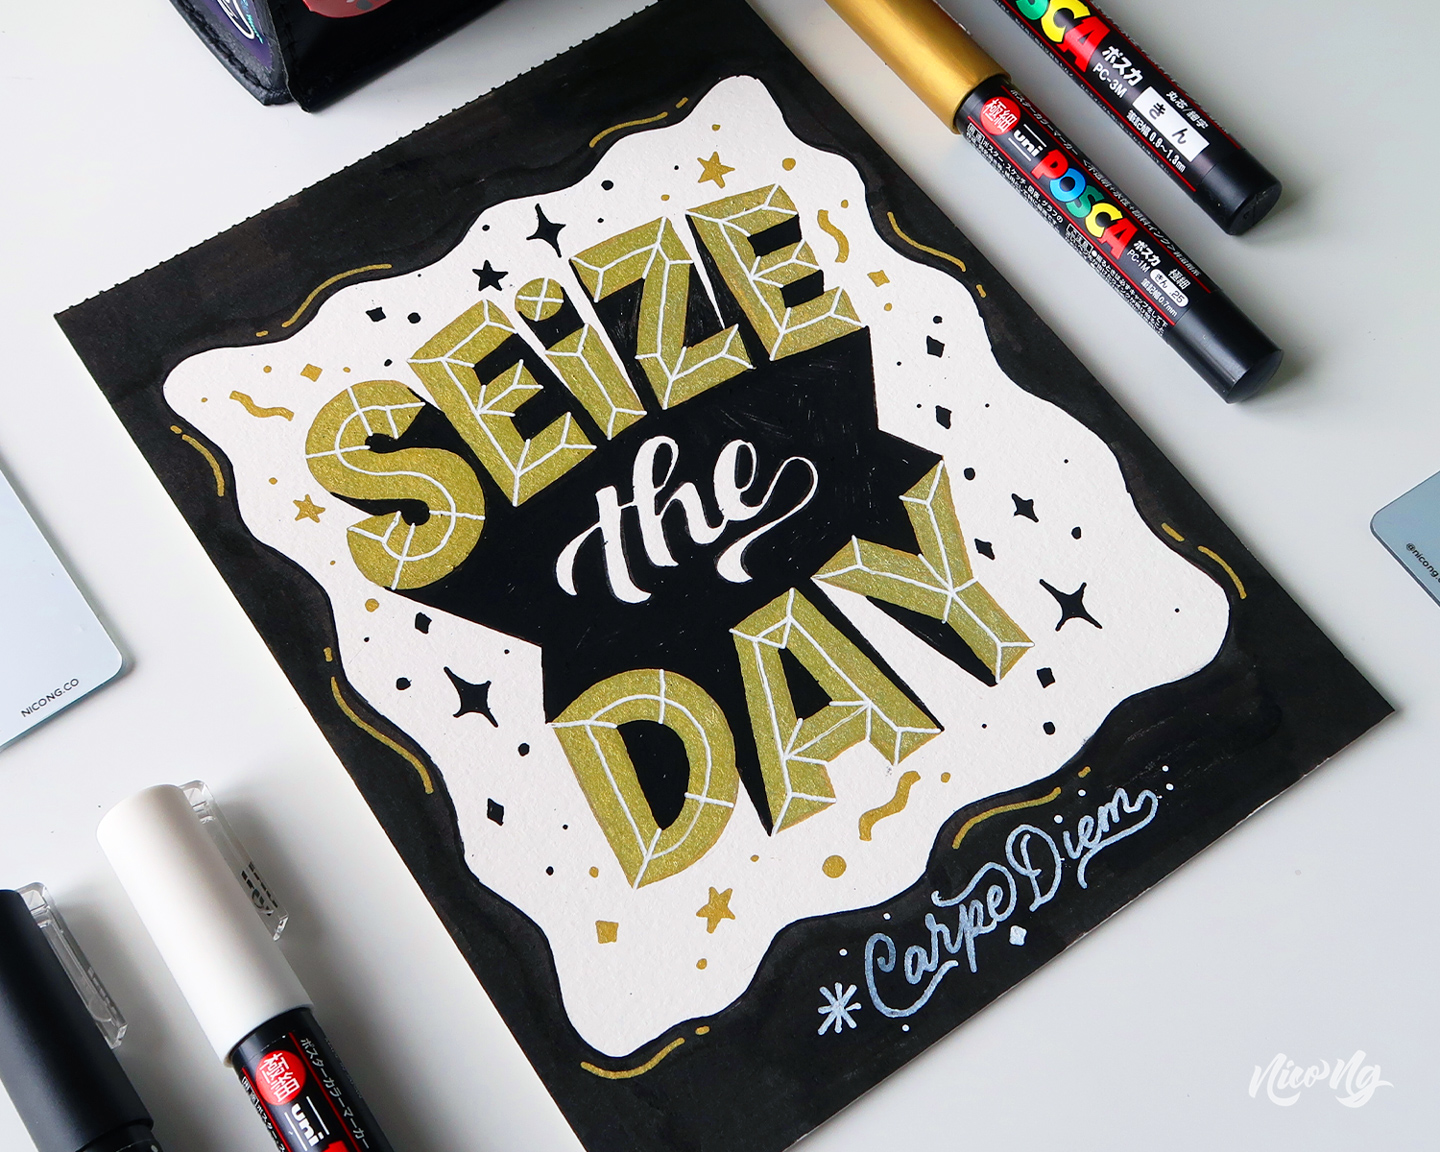 Radiant Geometry Hand Lettering Tutorial by Nico Ng